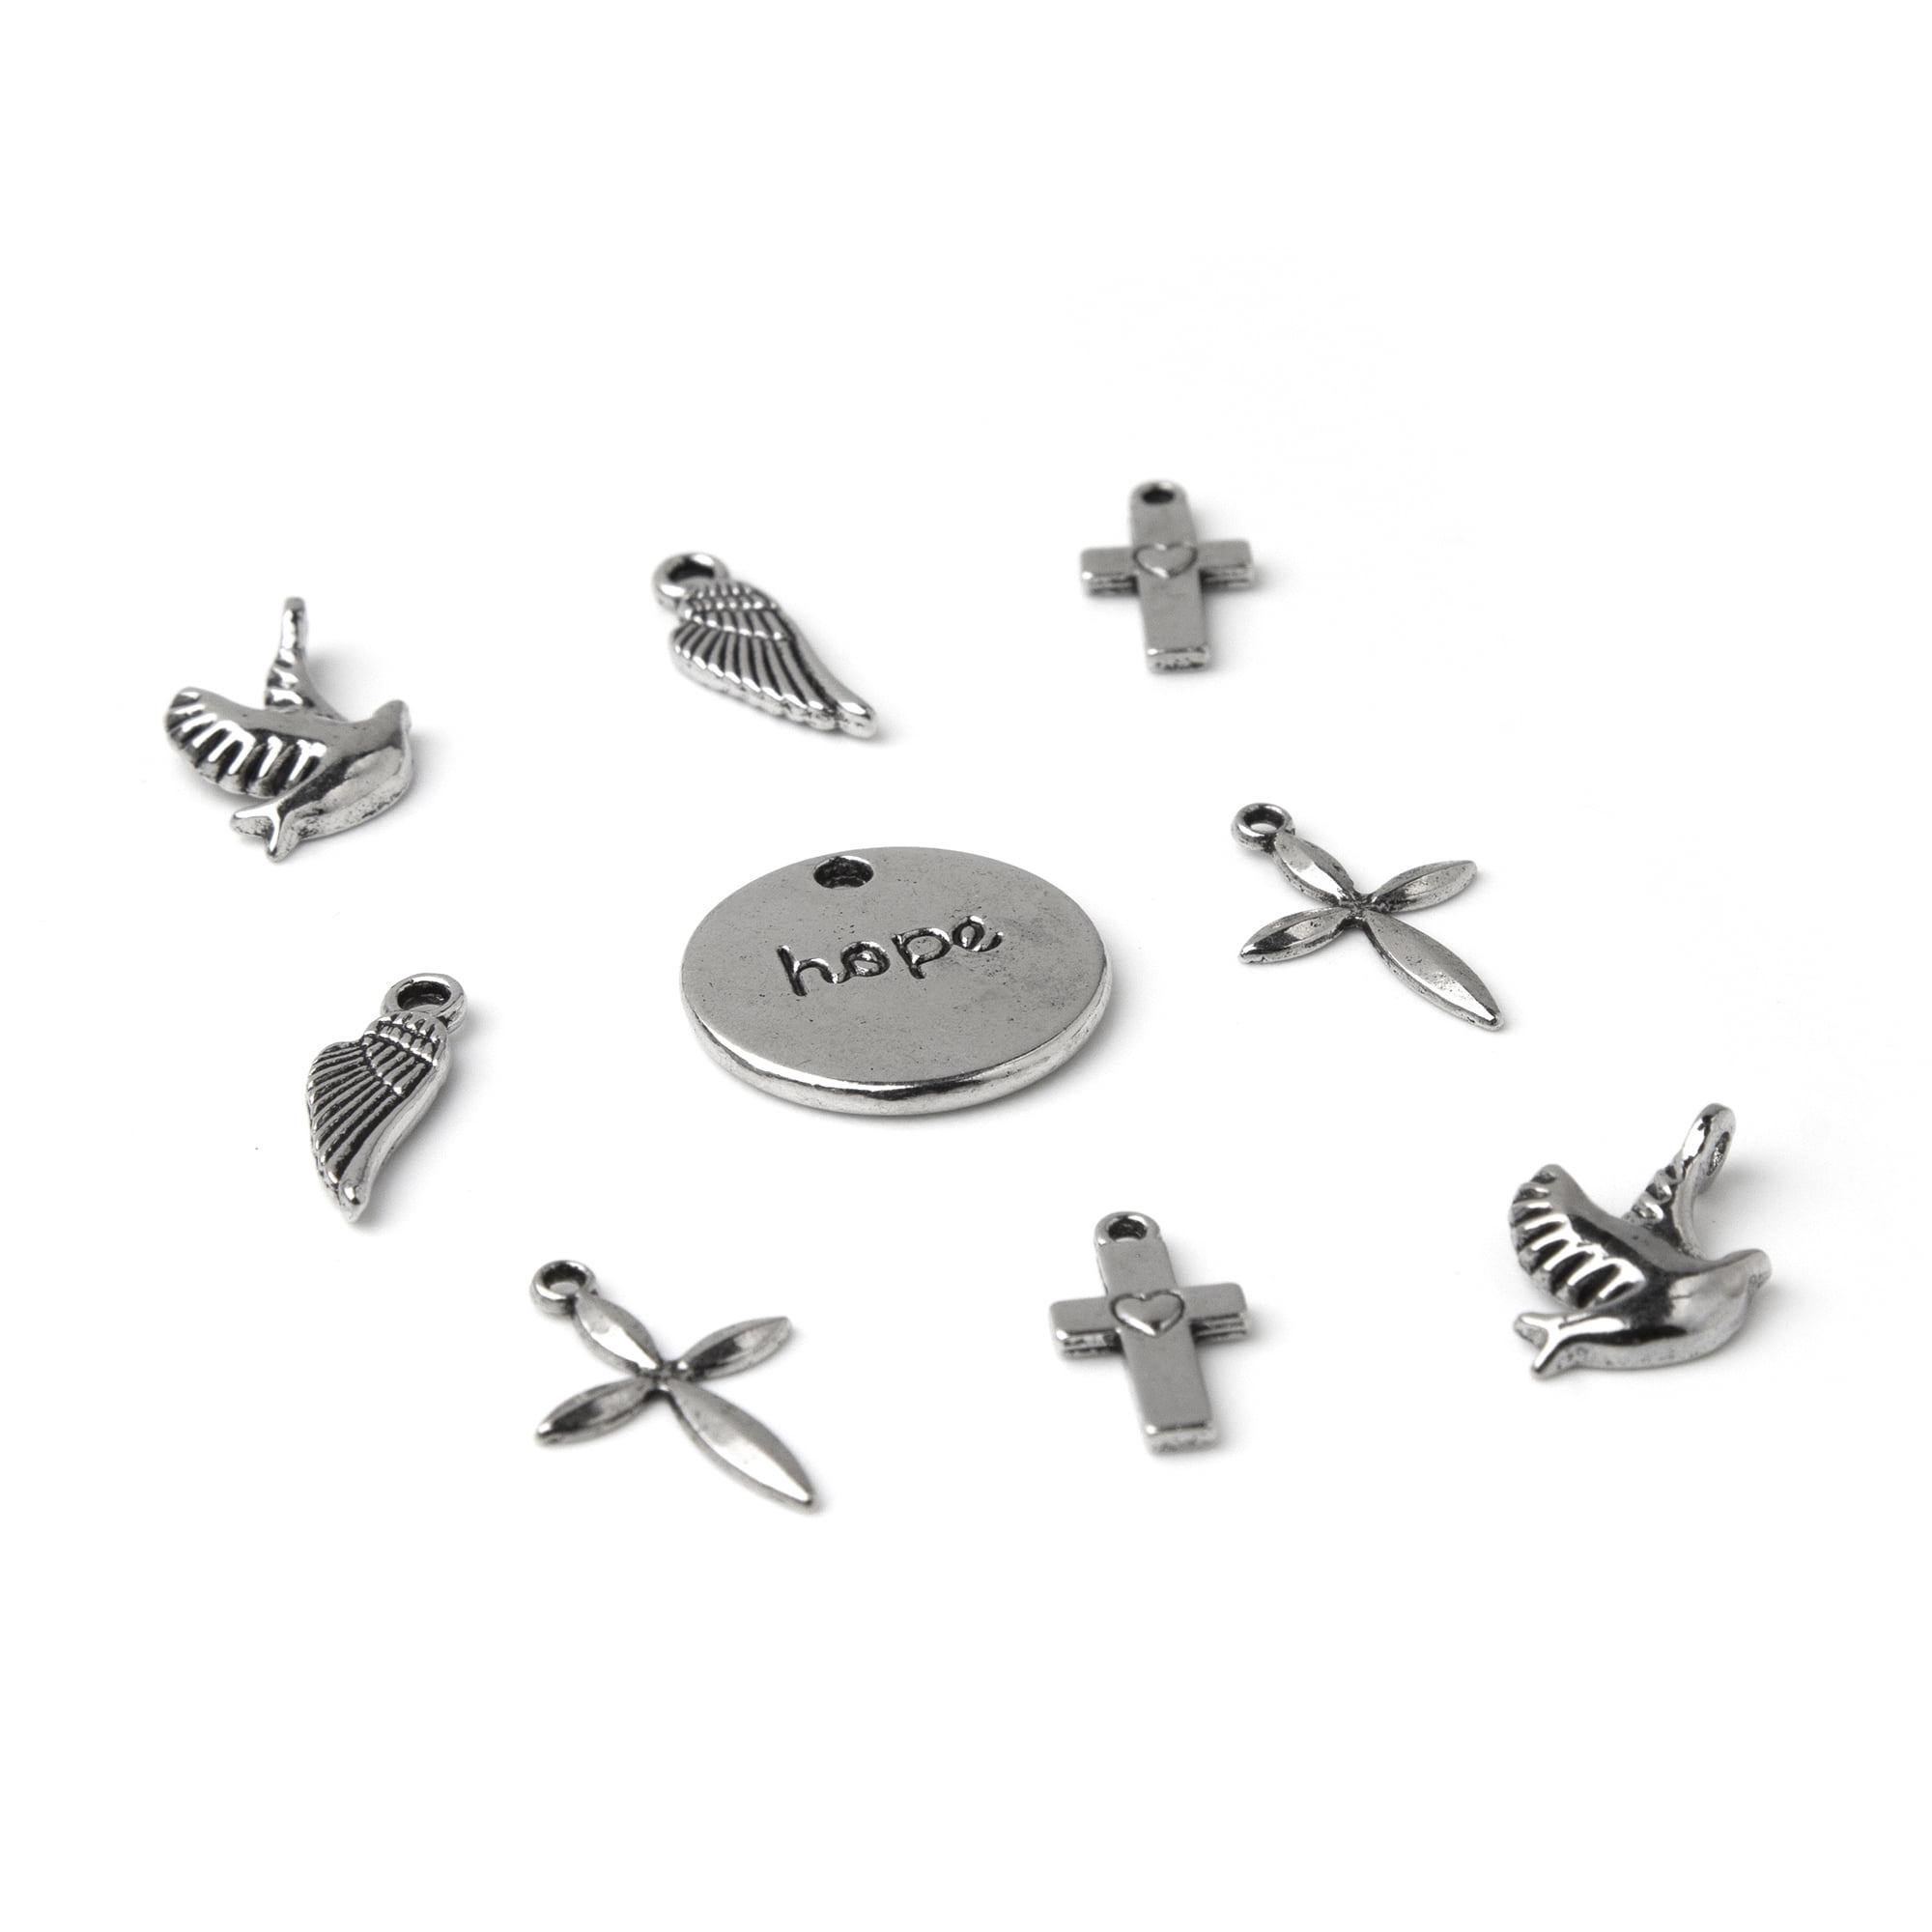 Wholesale 30% OFF 20/100/200PCS United States ARMY Charms Silver